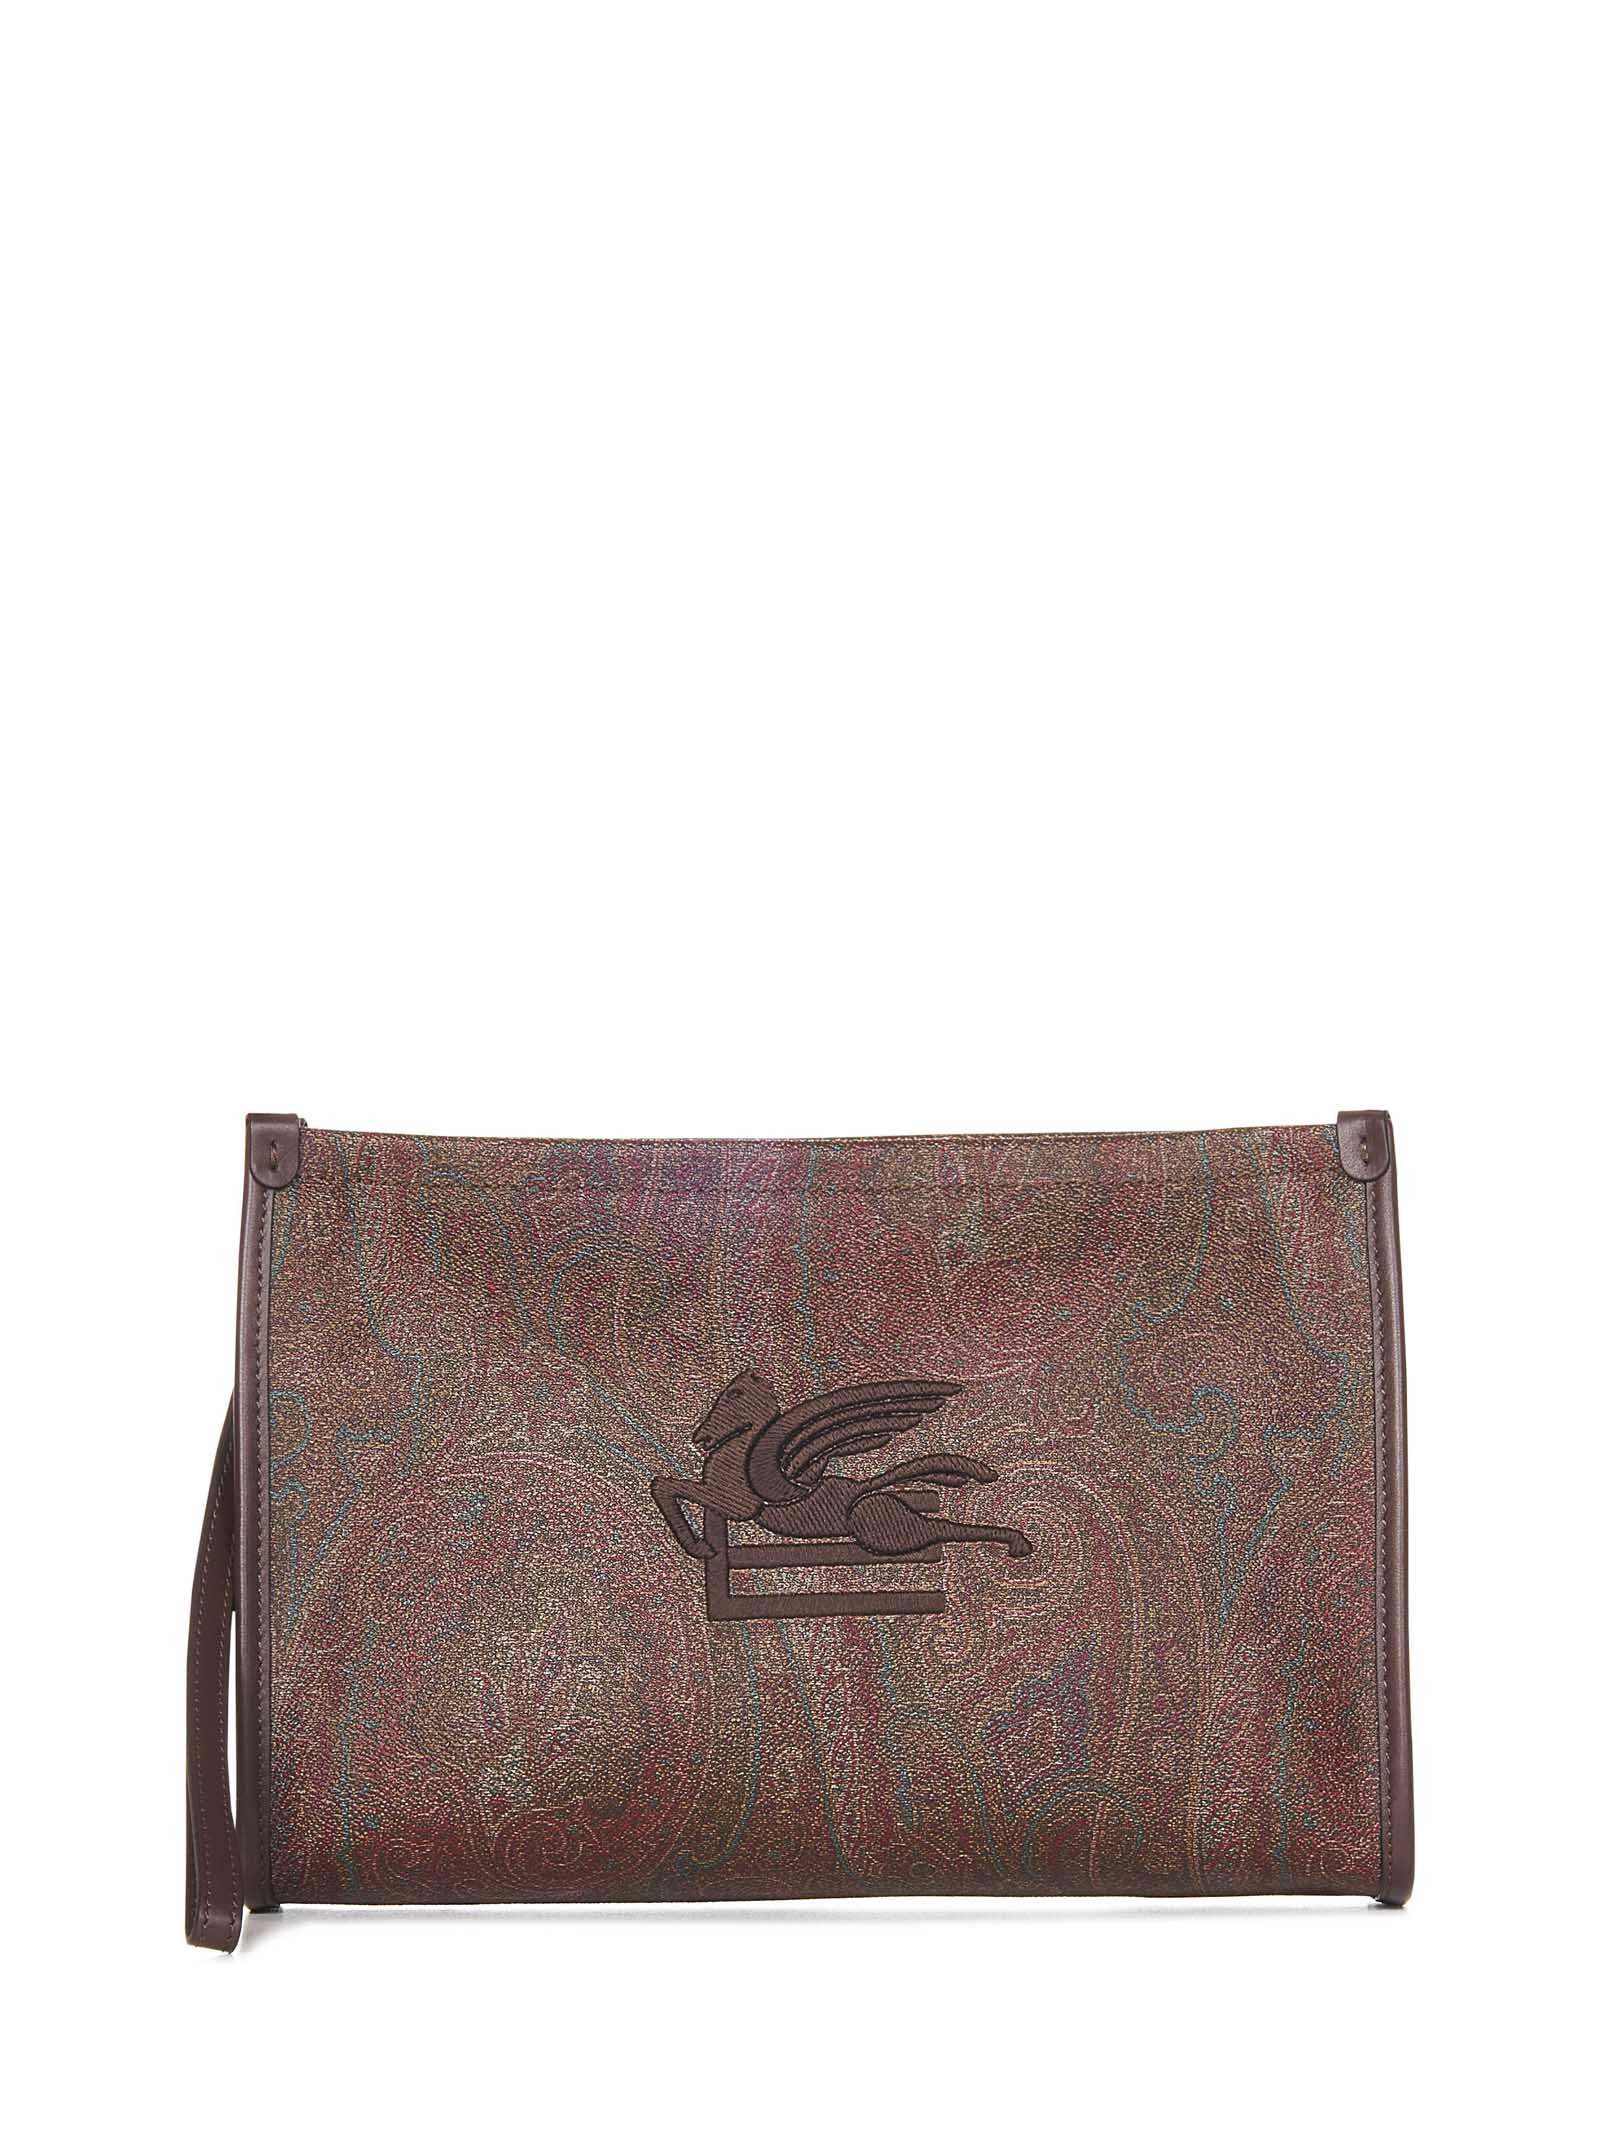 CLUTCH LOVE TROTTER PAISLEY ETRO - 1